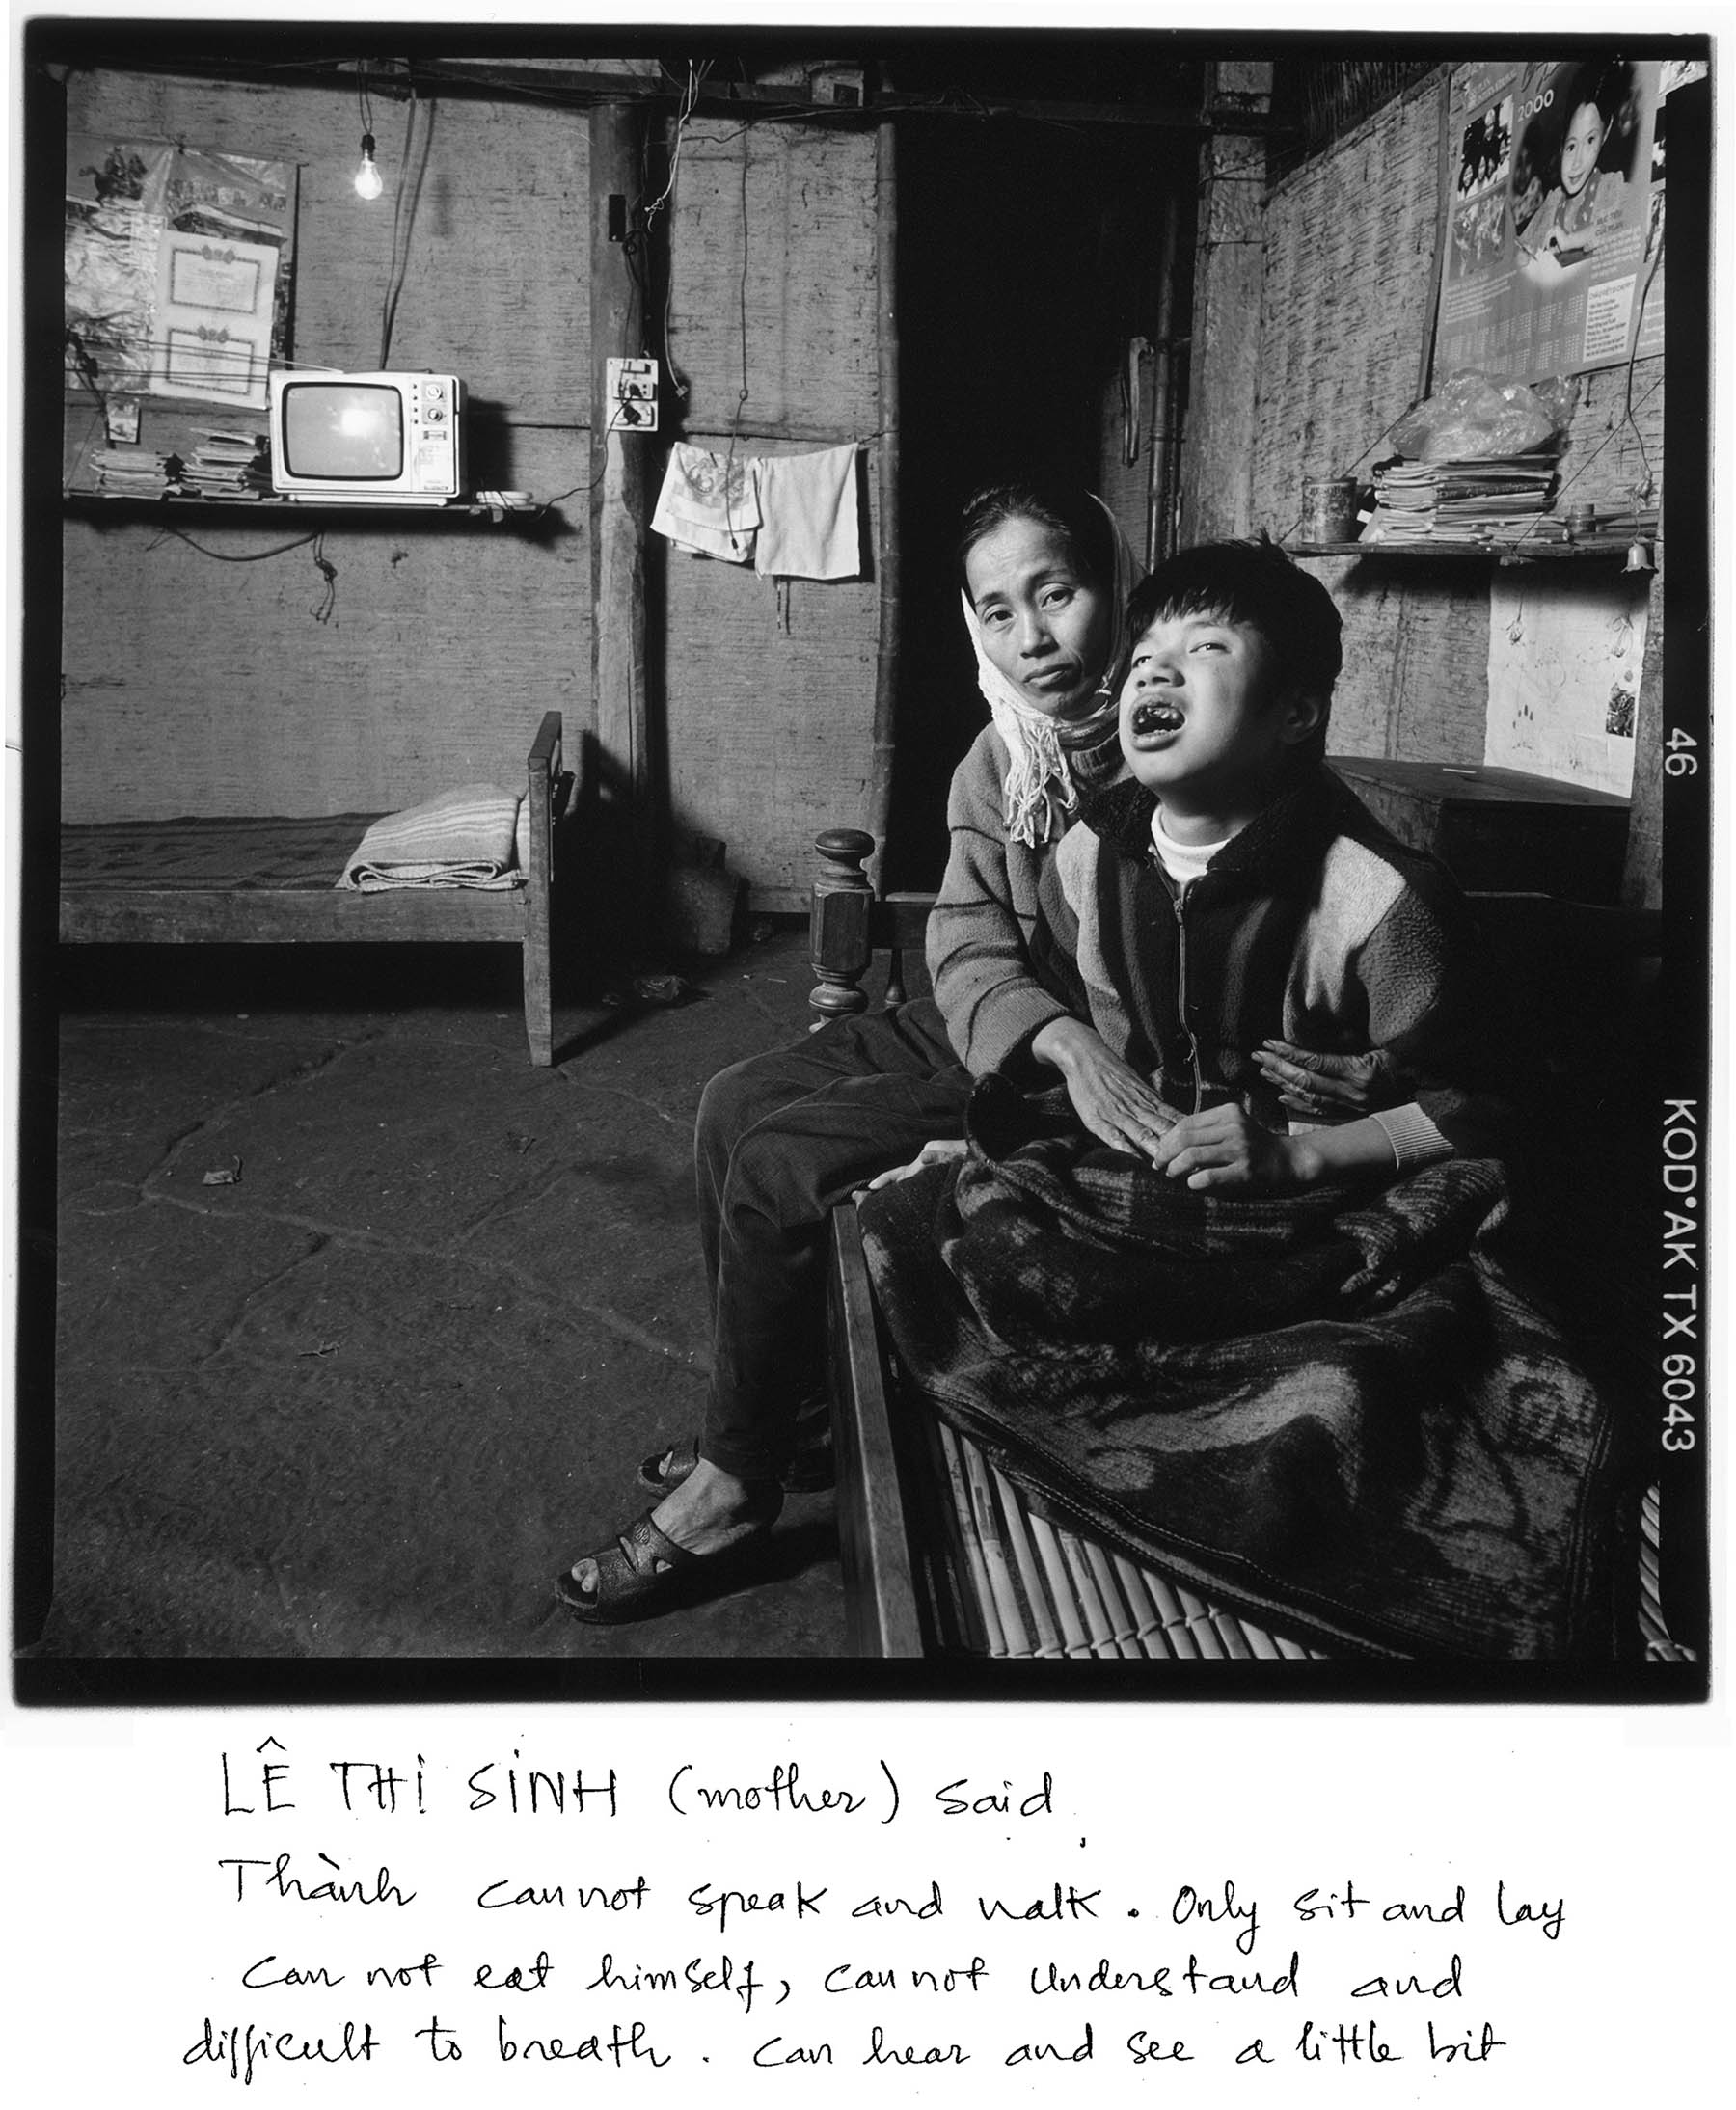 Cam Lo district (Quang Tri province) just south of the former North-South border is one of the heavily sprayed areas.
Dao Duy Thanh (boy, 12) is a possible victim. Mother Le Thi Sinh (39): "Thanh can't speak and walk, only sit and lie down. He can't eat by himself, can't understand (people) and has difficulty in breathing. He can hear and see a little."
They live in Cam Thuy commune (Cam Lo). Sinh says her husband was in the N-Vietnamese army for 5 years. He died in 1998 of blood cancer.